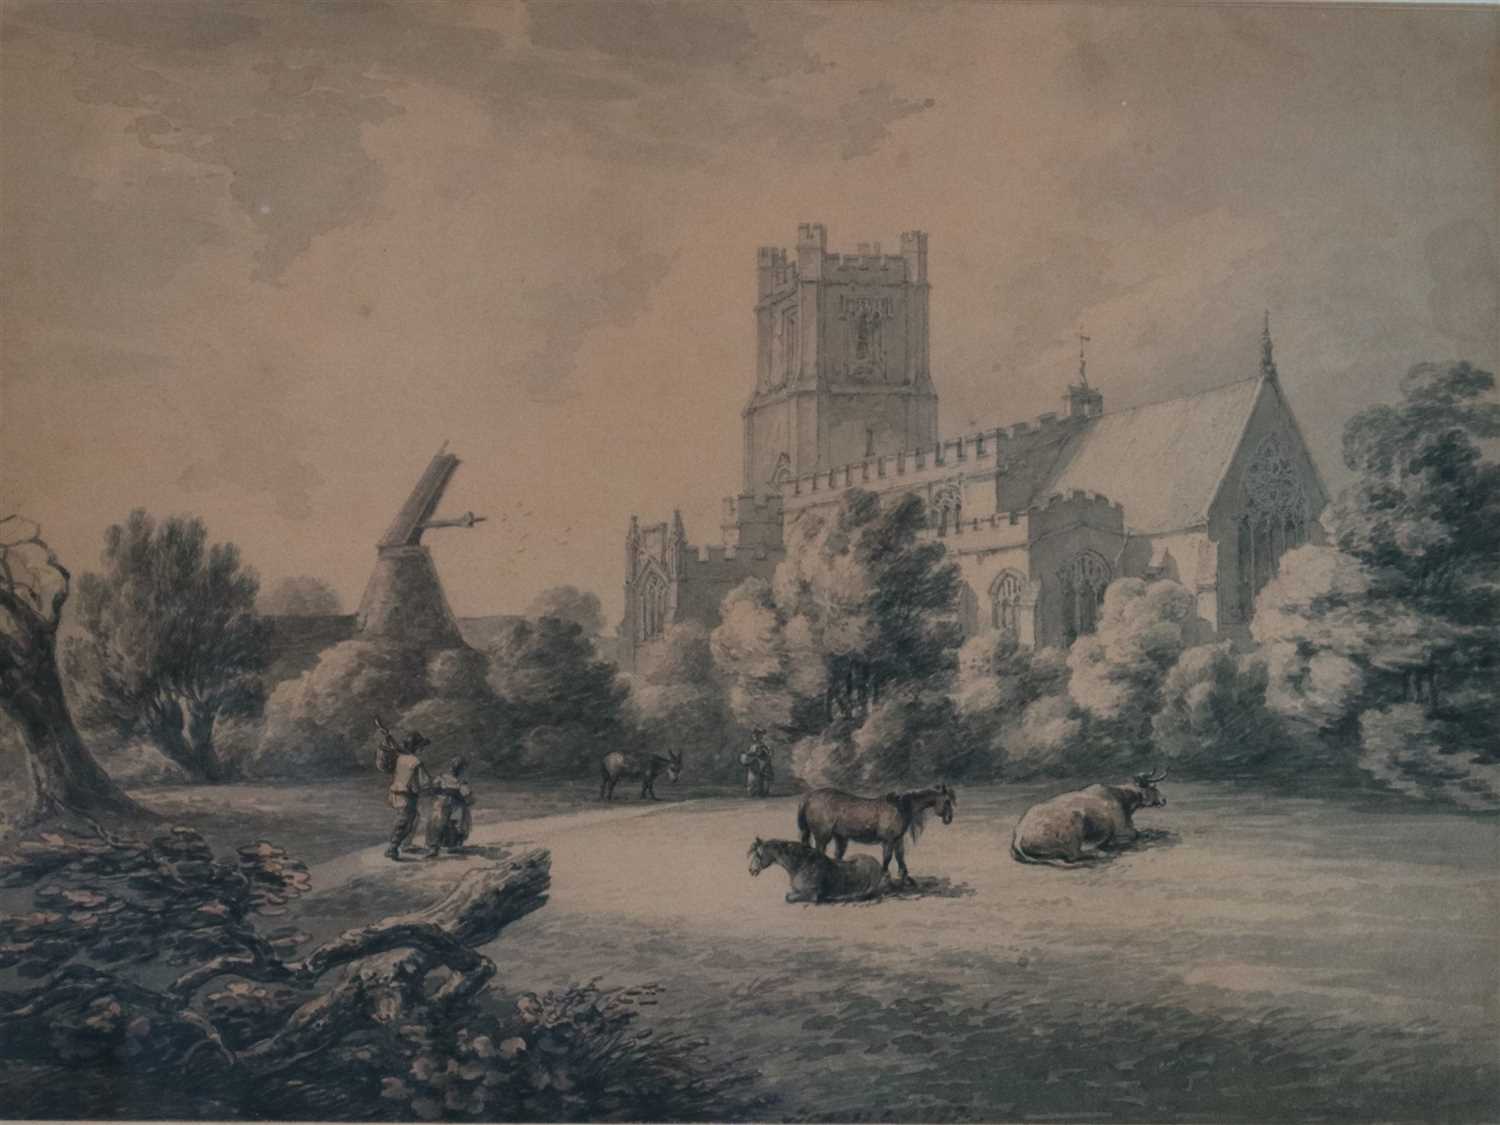 Lot 36 - Thomas Hearne (1744-1817), Great Dunlow Church with Figures